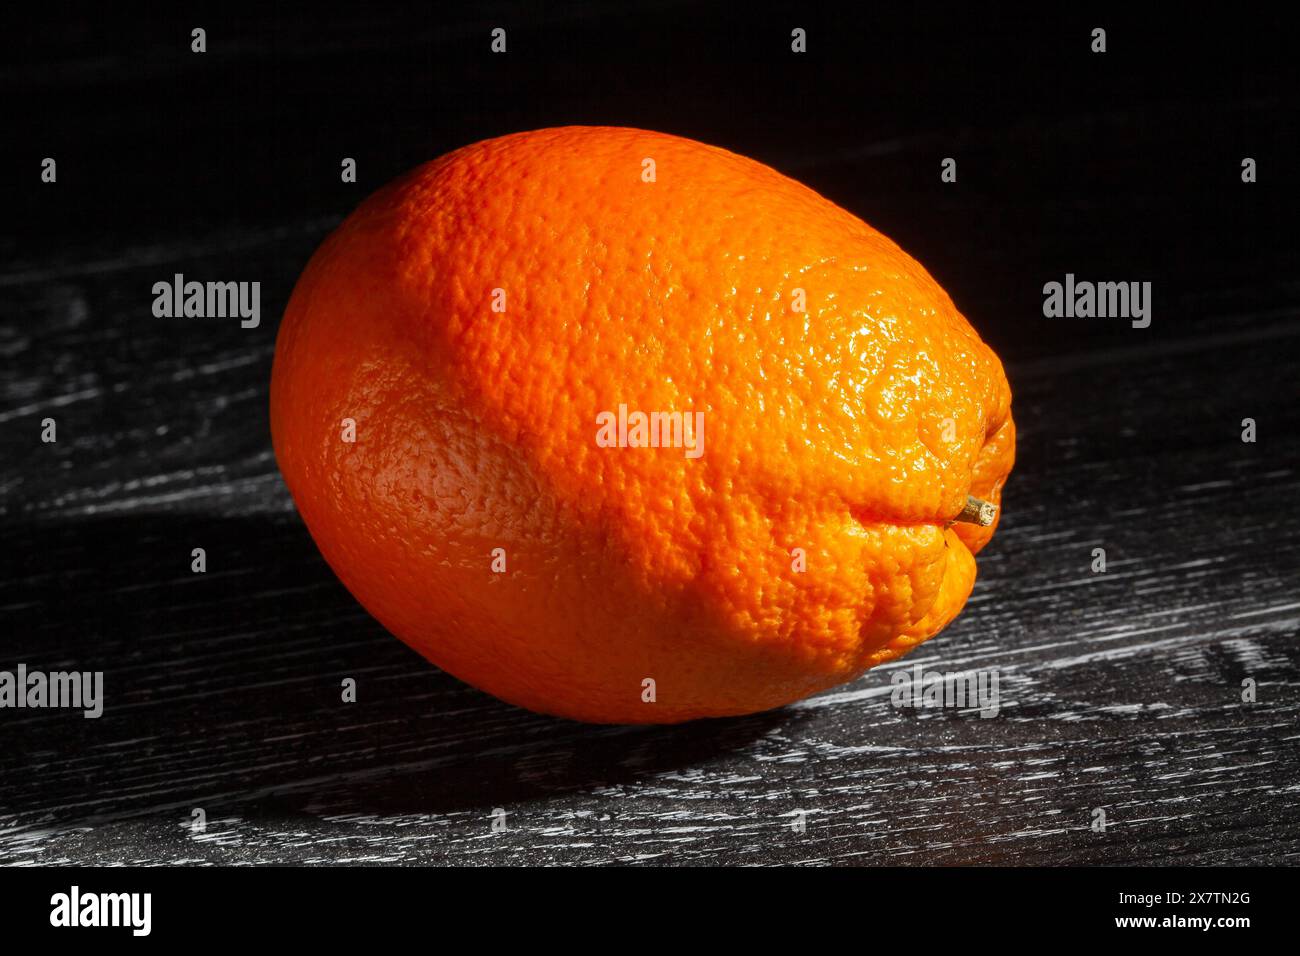 calabrian oval blond oranges on black wood background Stock Photo